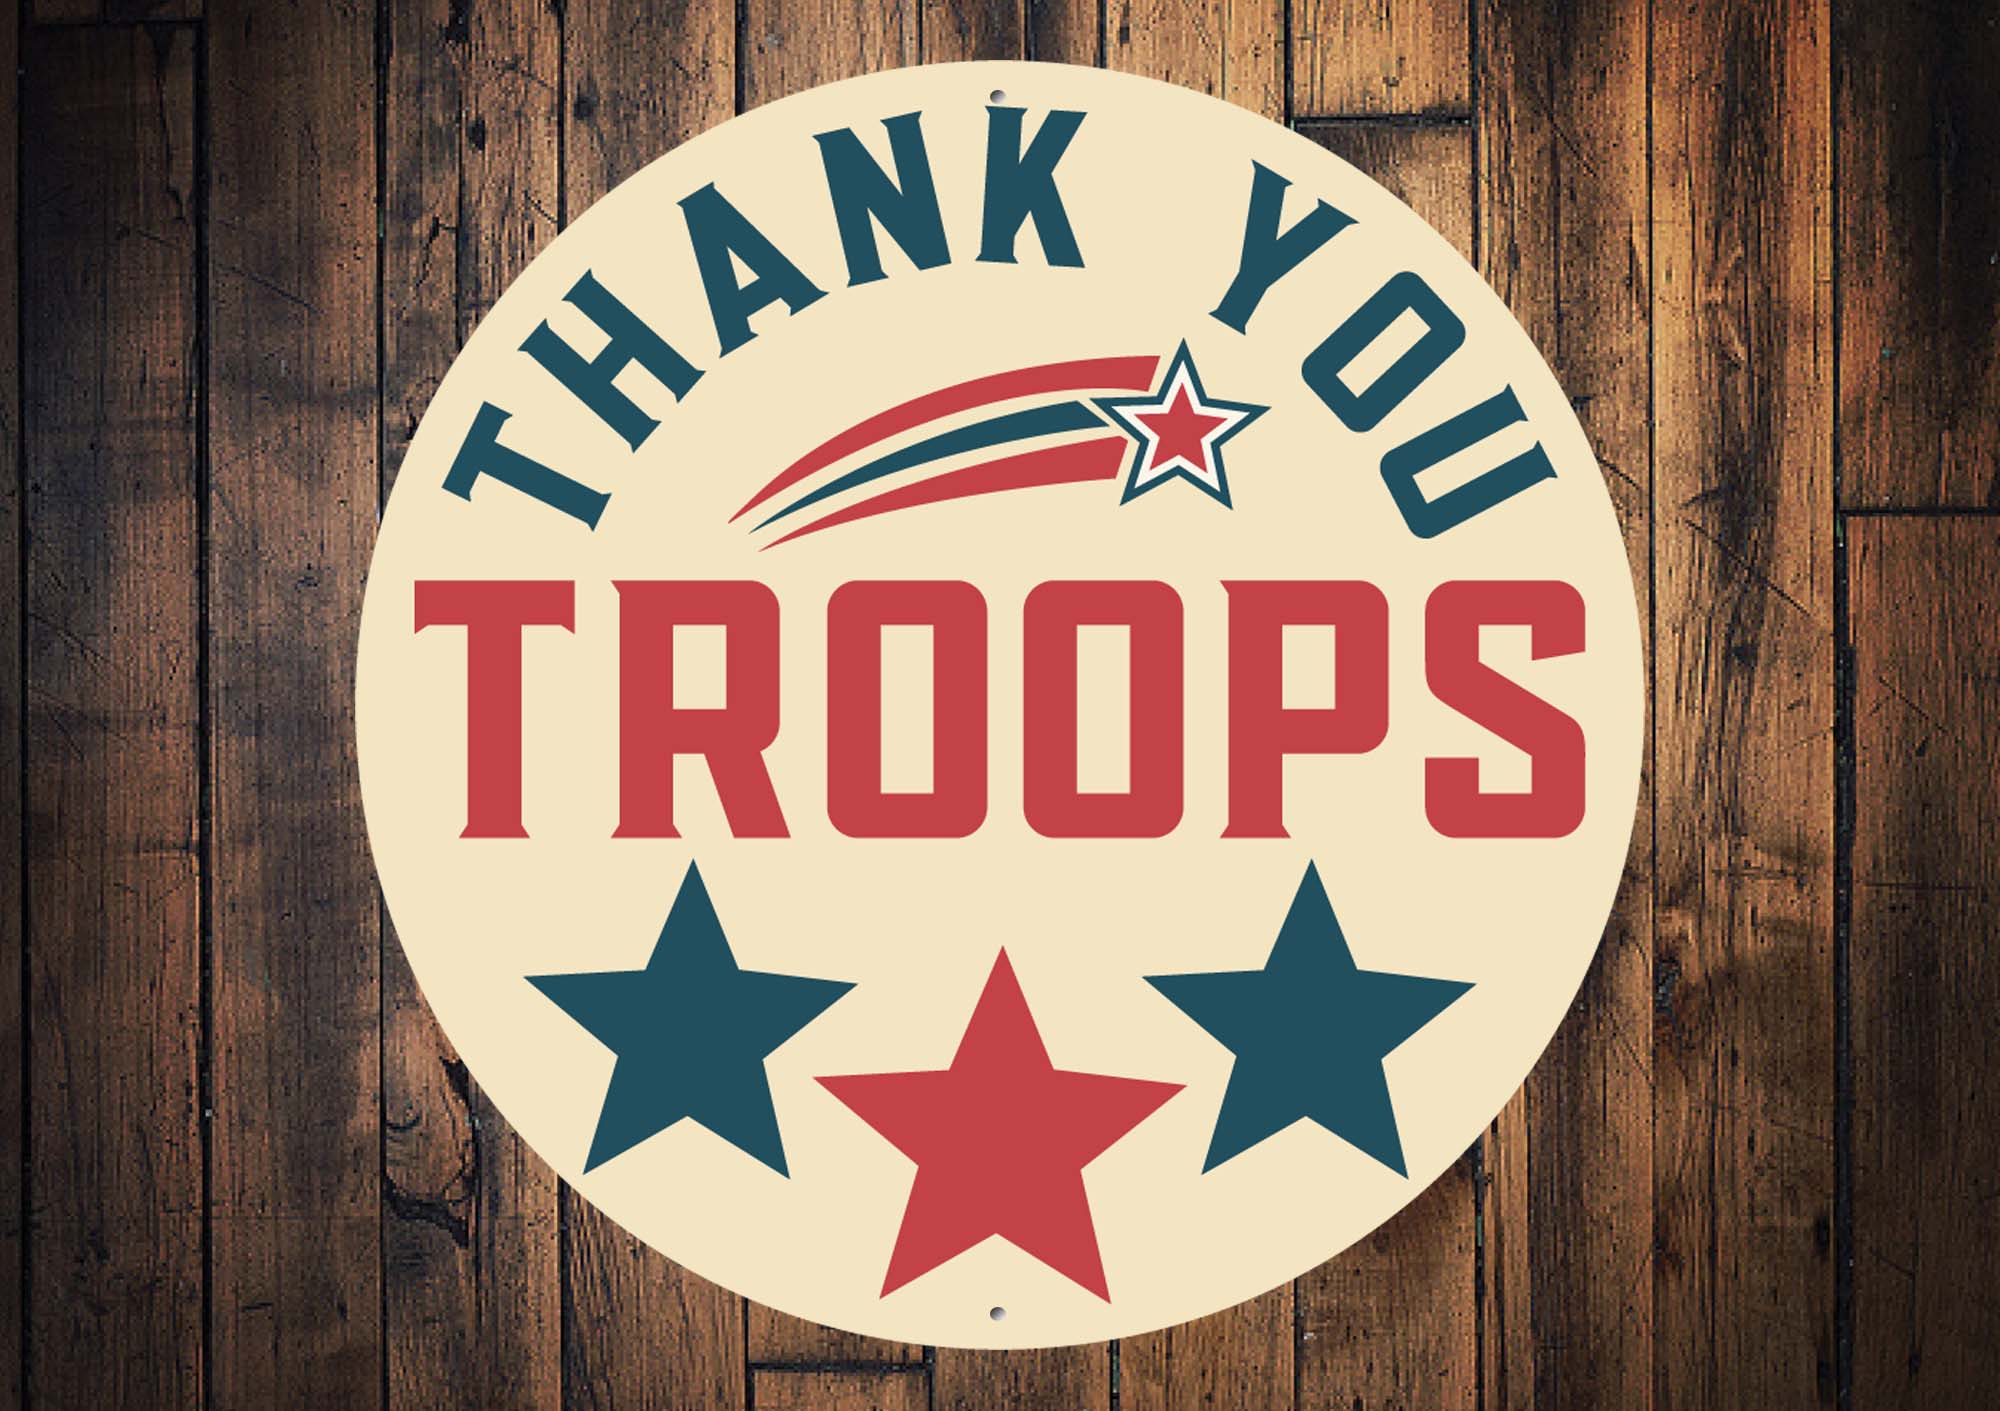 Thank You Troops Round Sign